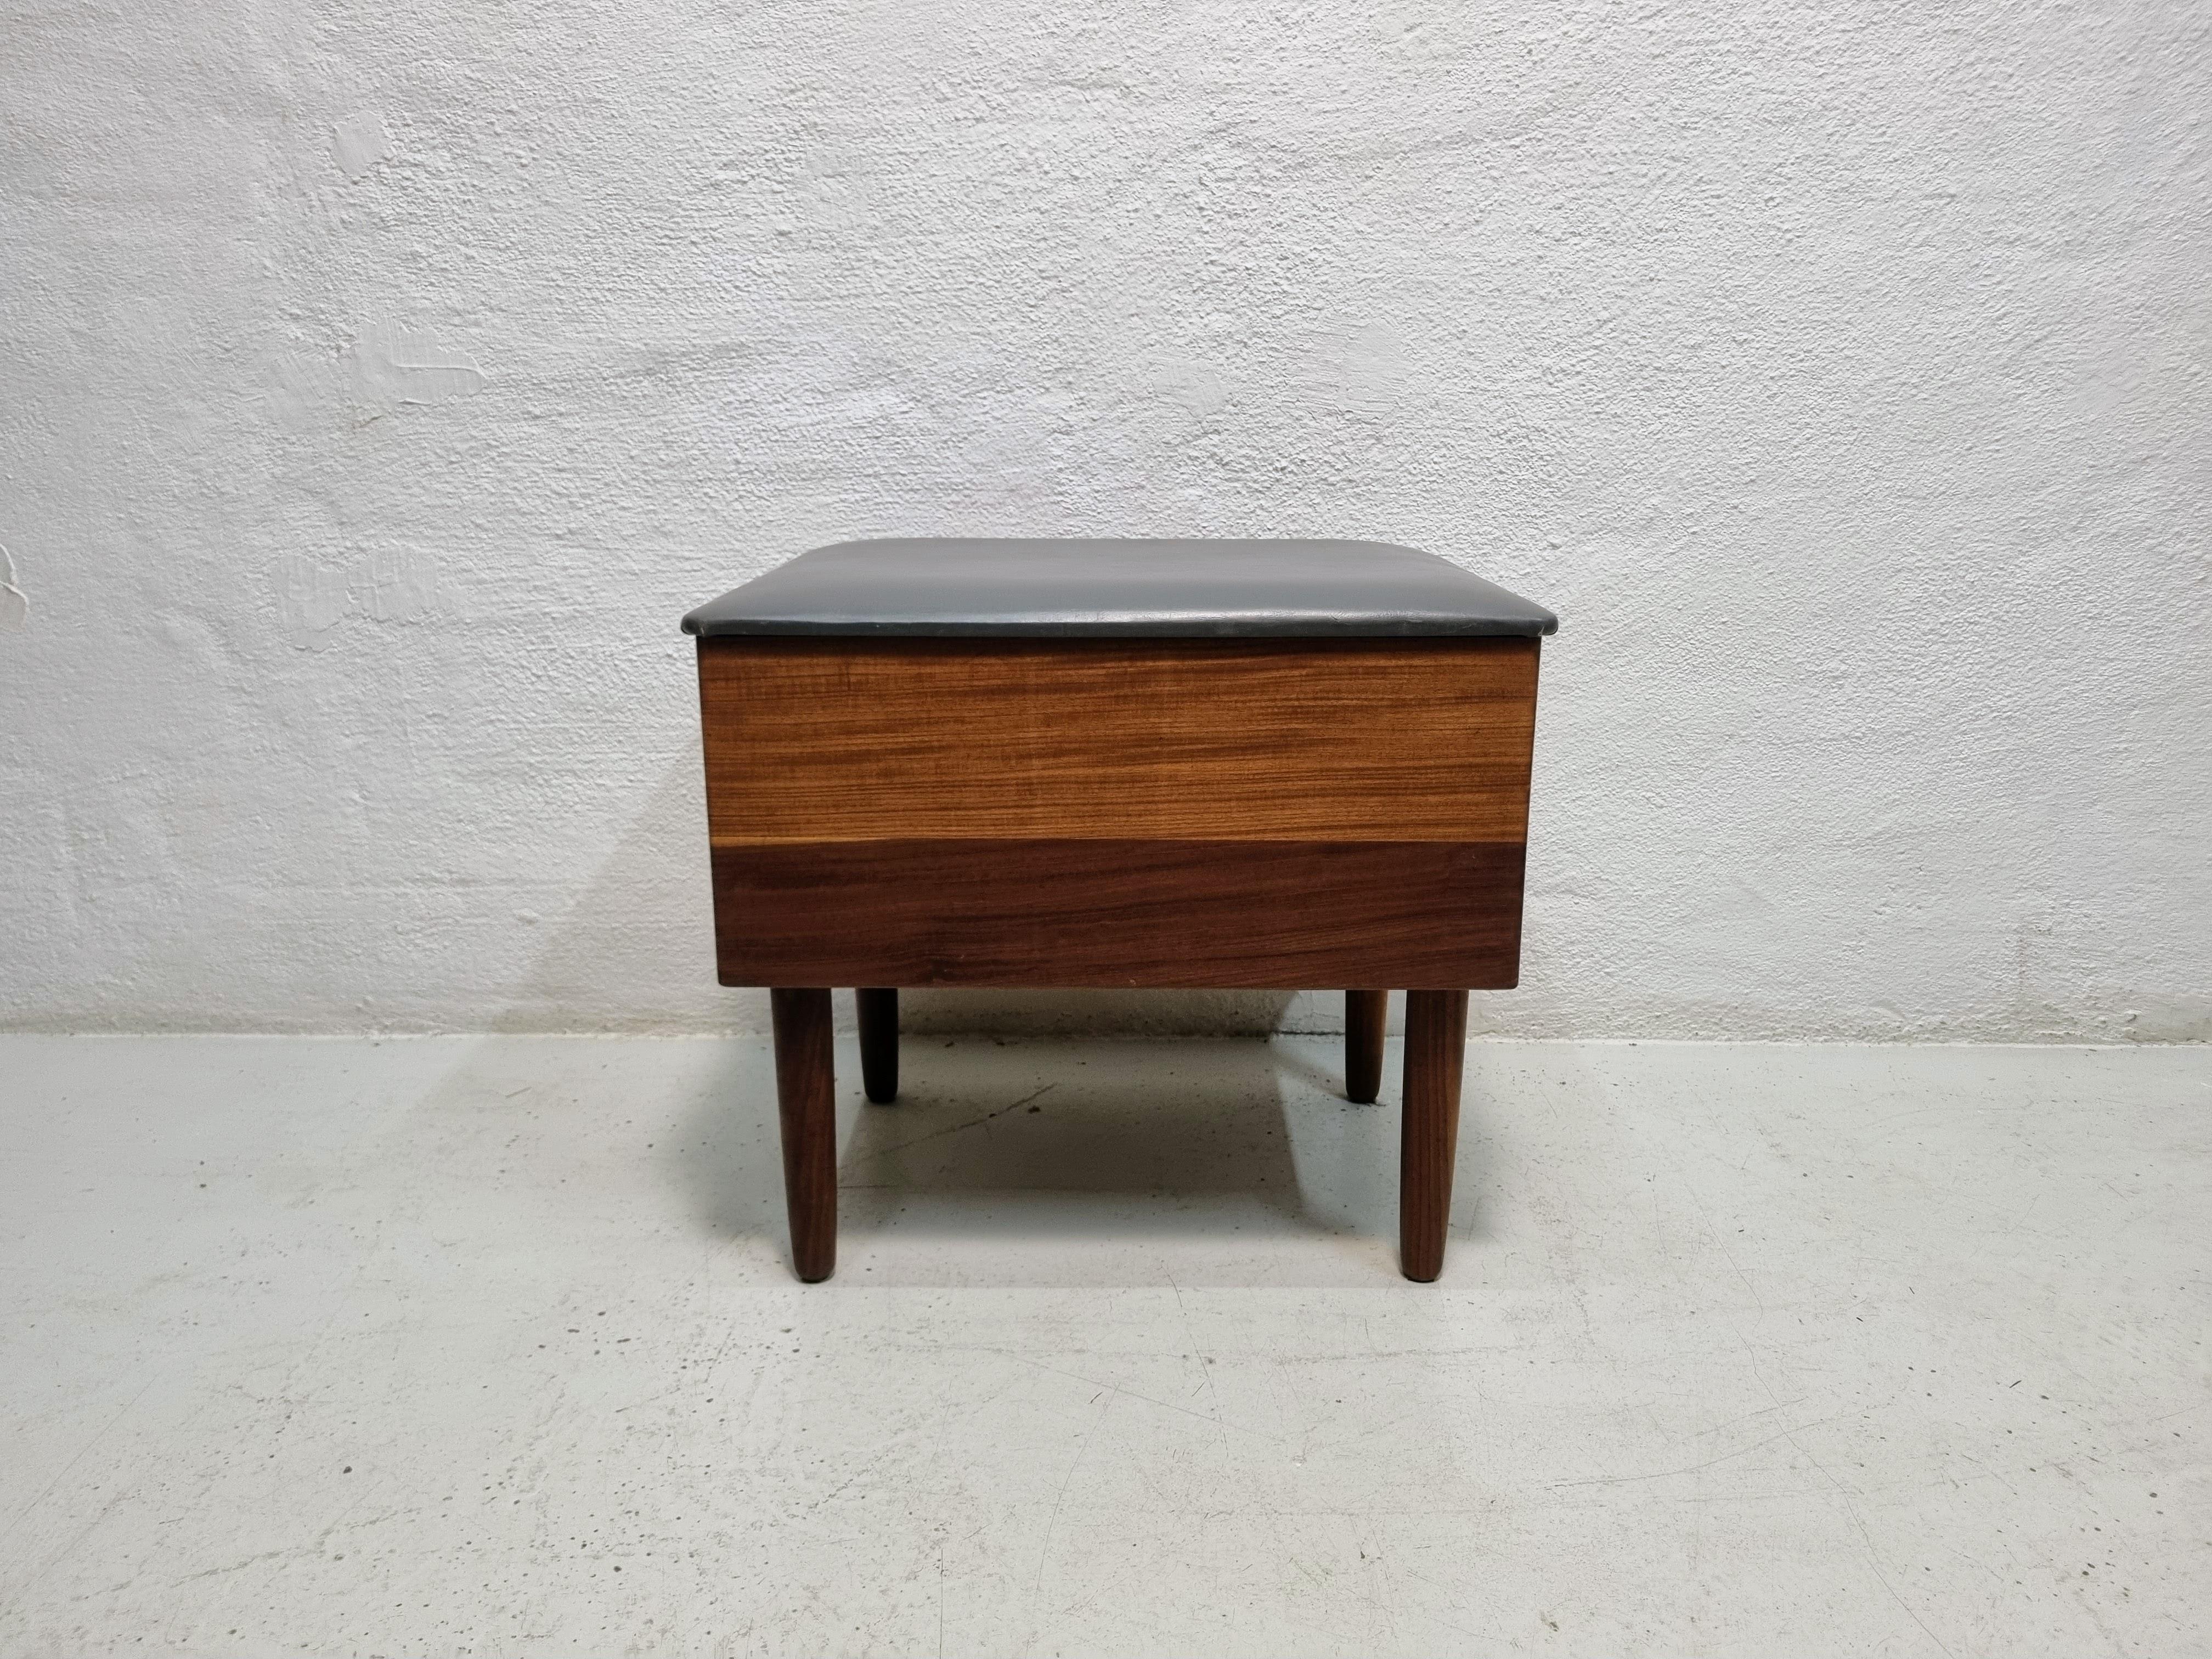 Teak stool with storage space under the seat.
Seat upholstered in gray artificial leather.